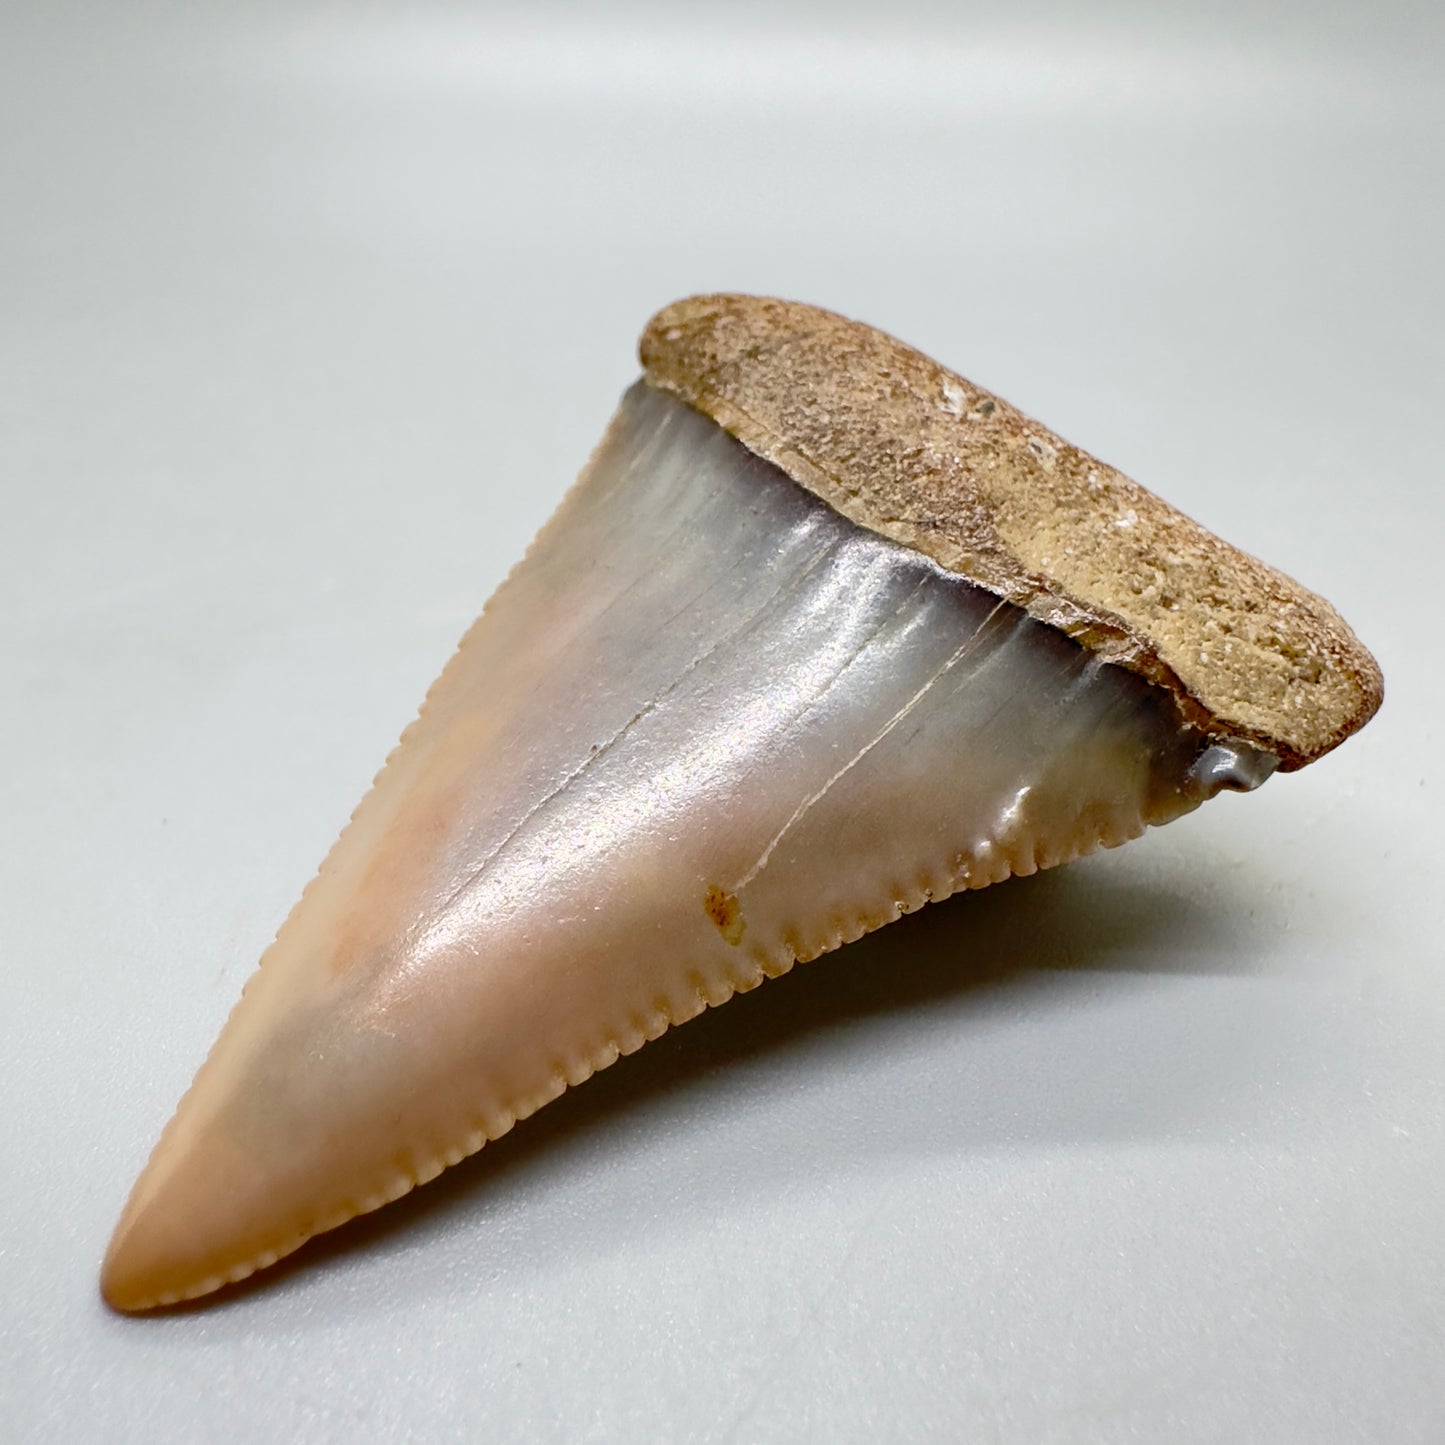 Pink and blue 2.10" Serrated Fossil Great White Tooth from Sacaco, Peru GW1053 - Front right